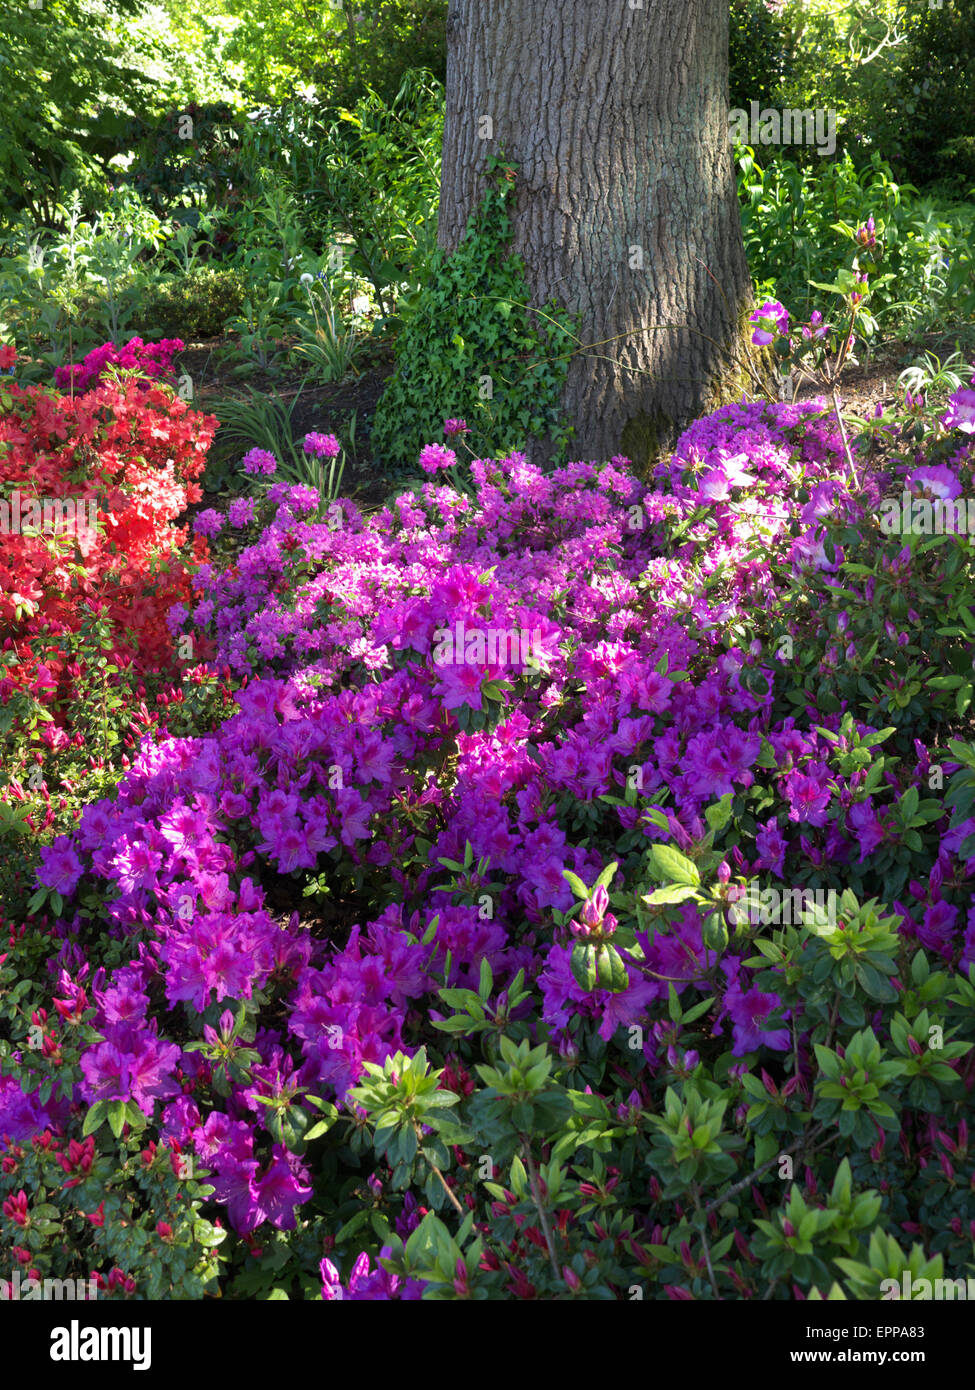 Lush sunlit purple Rhododendron in dappled shade with full spring bloom Stock Photo